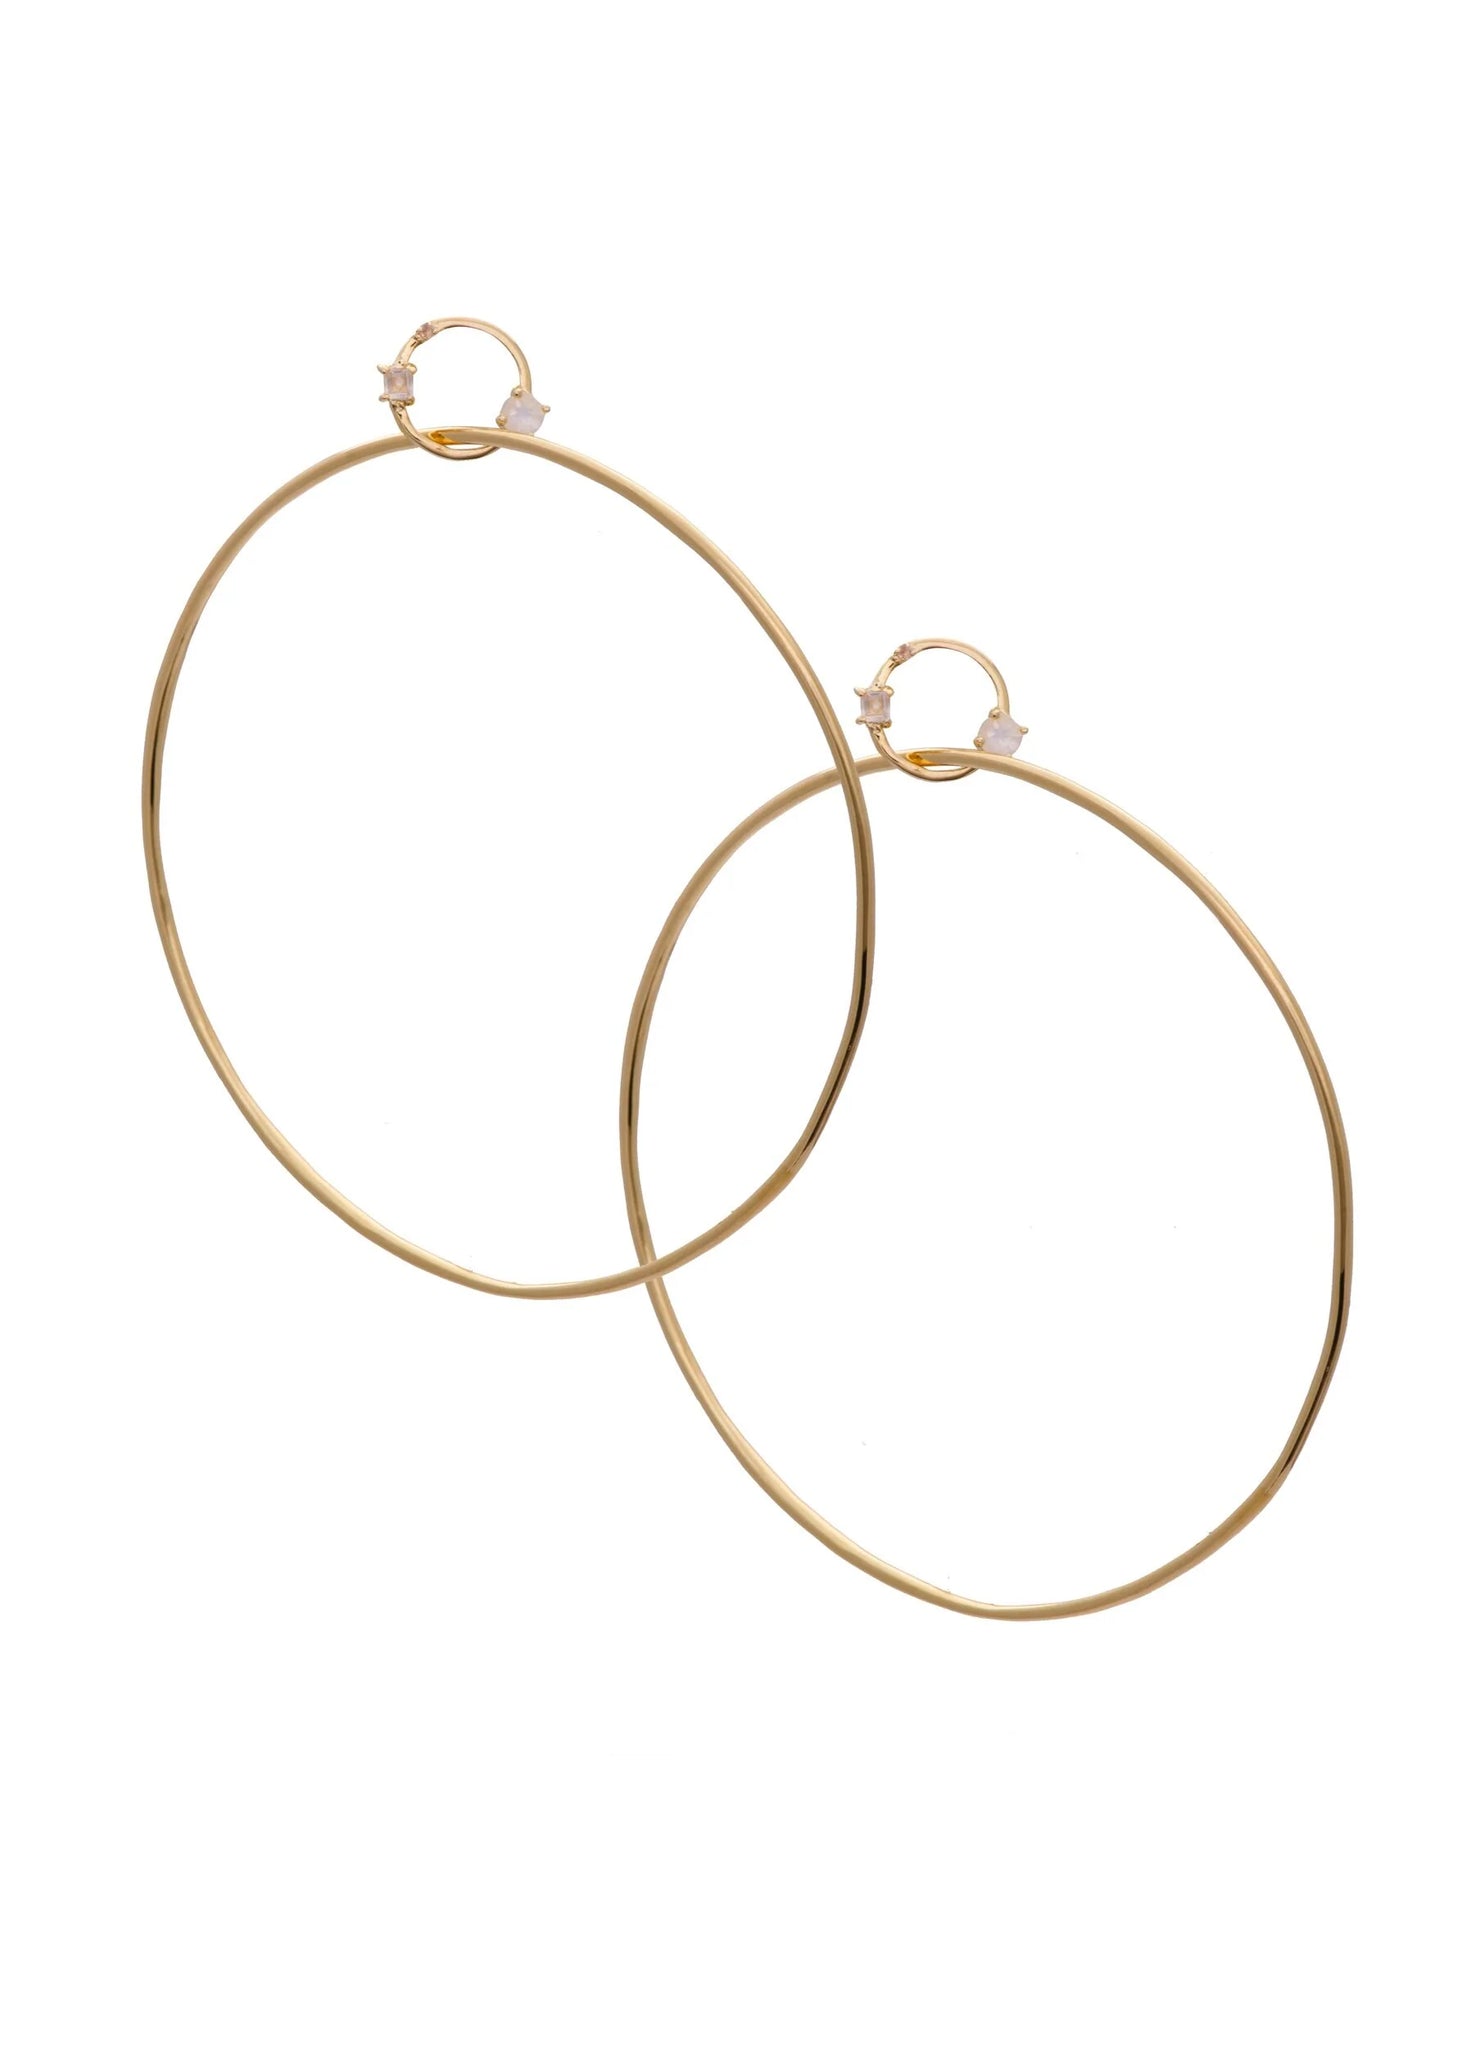 UNIKONCEPT Lifestyle Boutique and Lounge; Miley Large Hoops by Sarah Mulder in Gold Rose Quartz